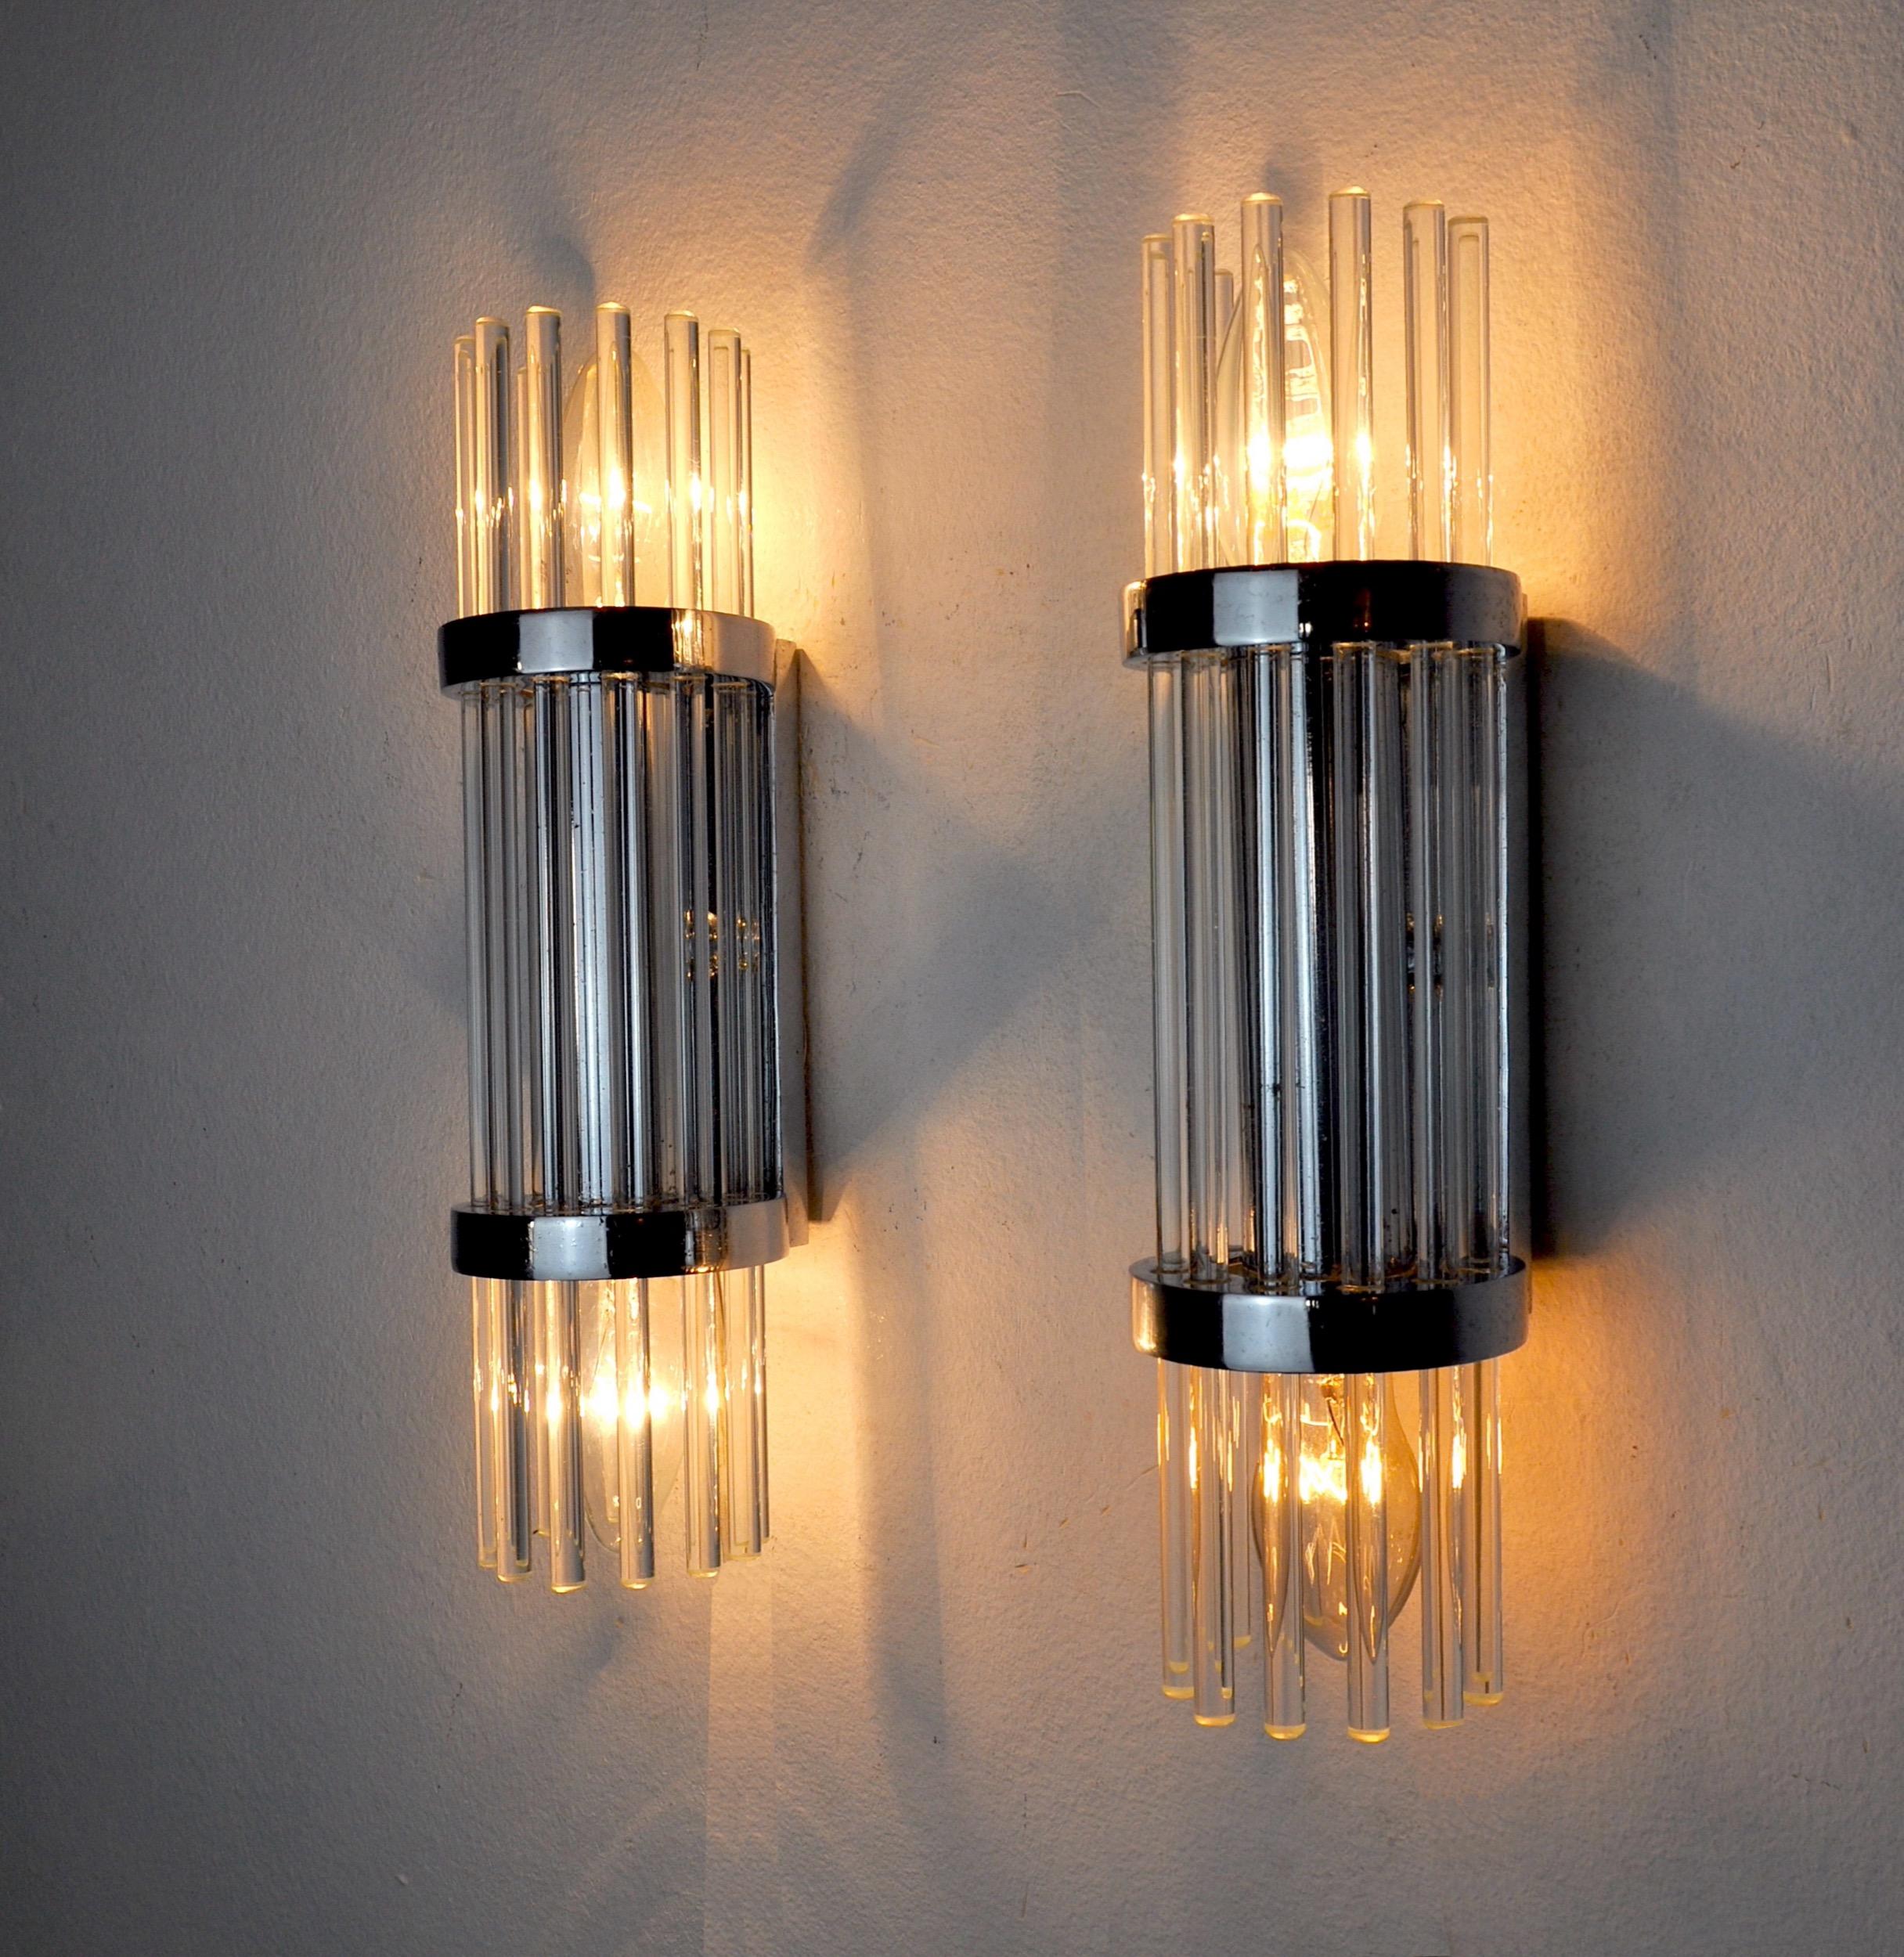 Very beautiful and rare pair of sciolari wall lamps designed and produced in murano, italy, in the 1970s.

Composed of murano glass crystal rods and a chromed metal structure, these sconces are spectacular.

Rare design object that will